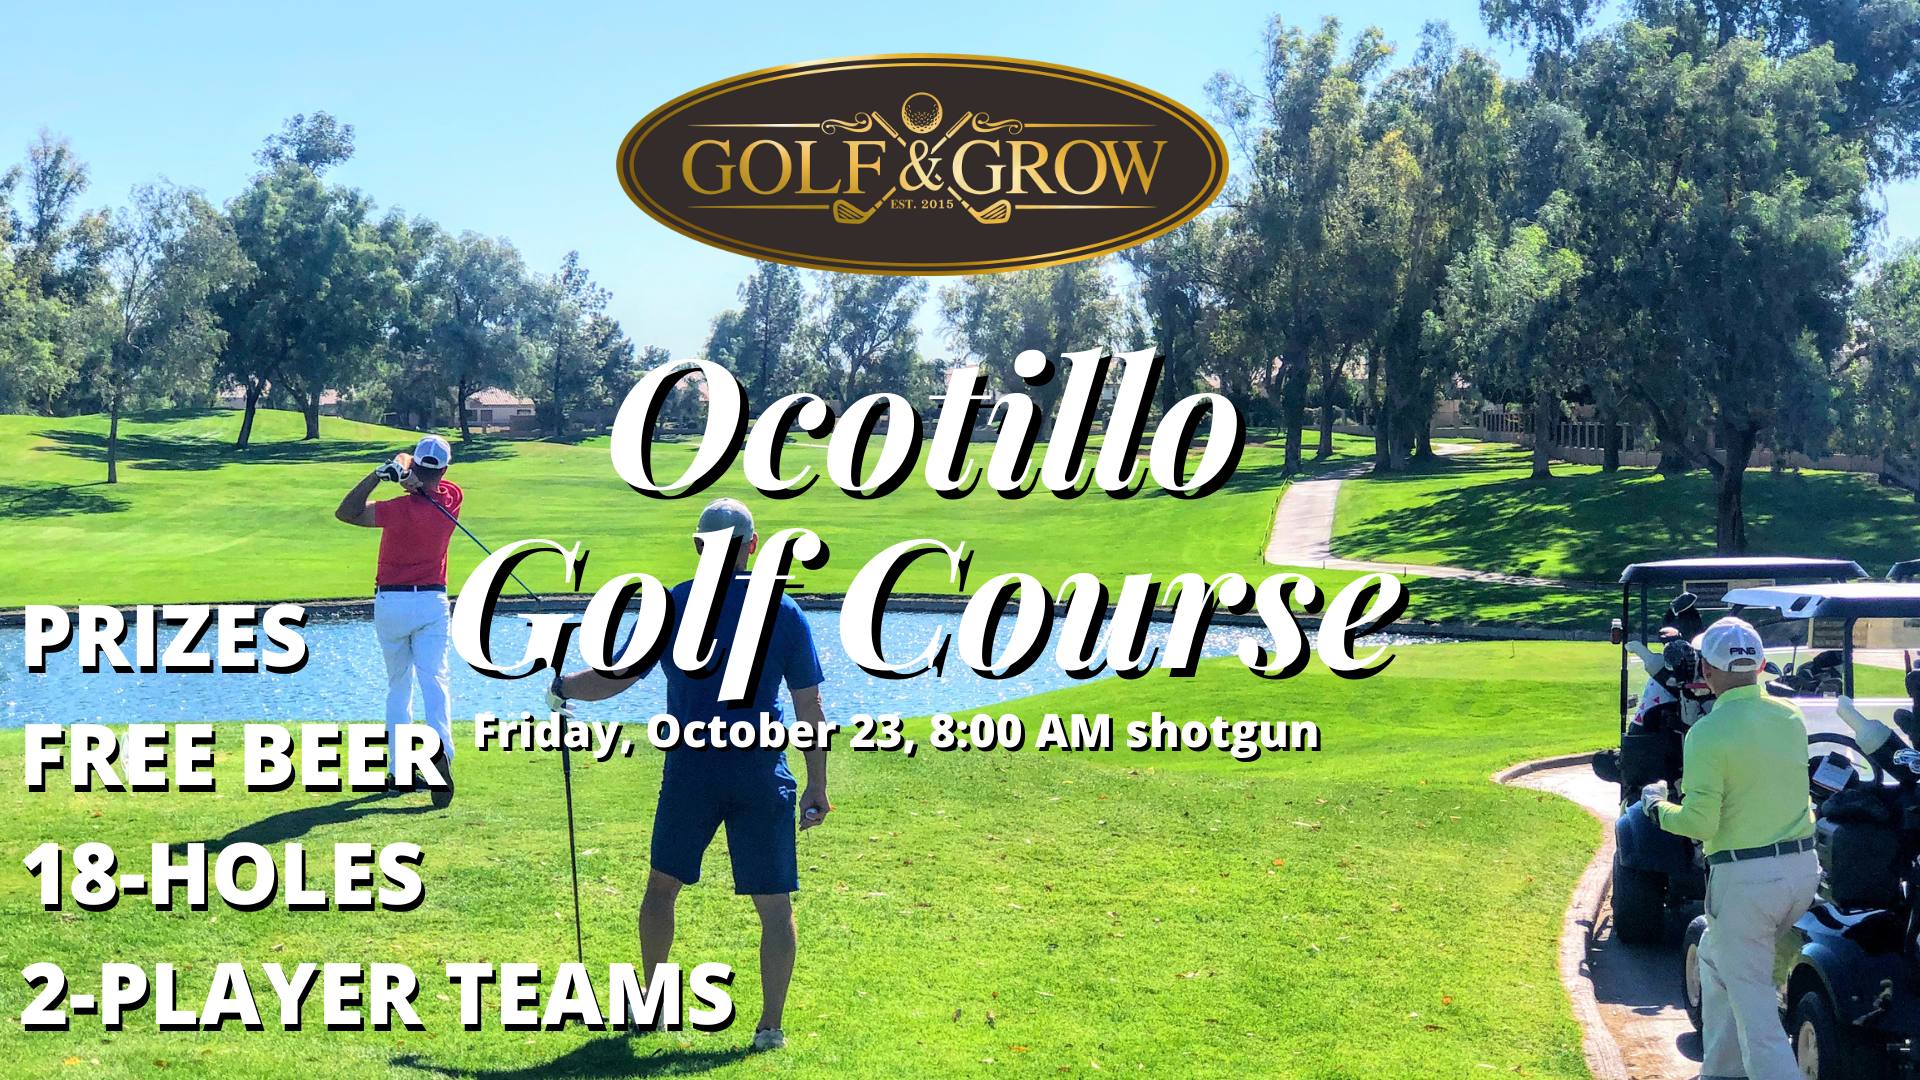 Golf & Grow tournament at Ocotillo is the best tournament in the valley to play and win prizes